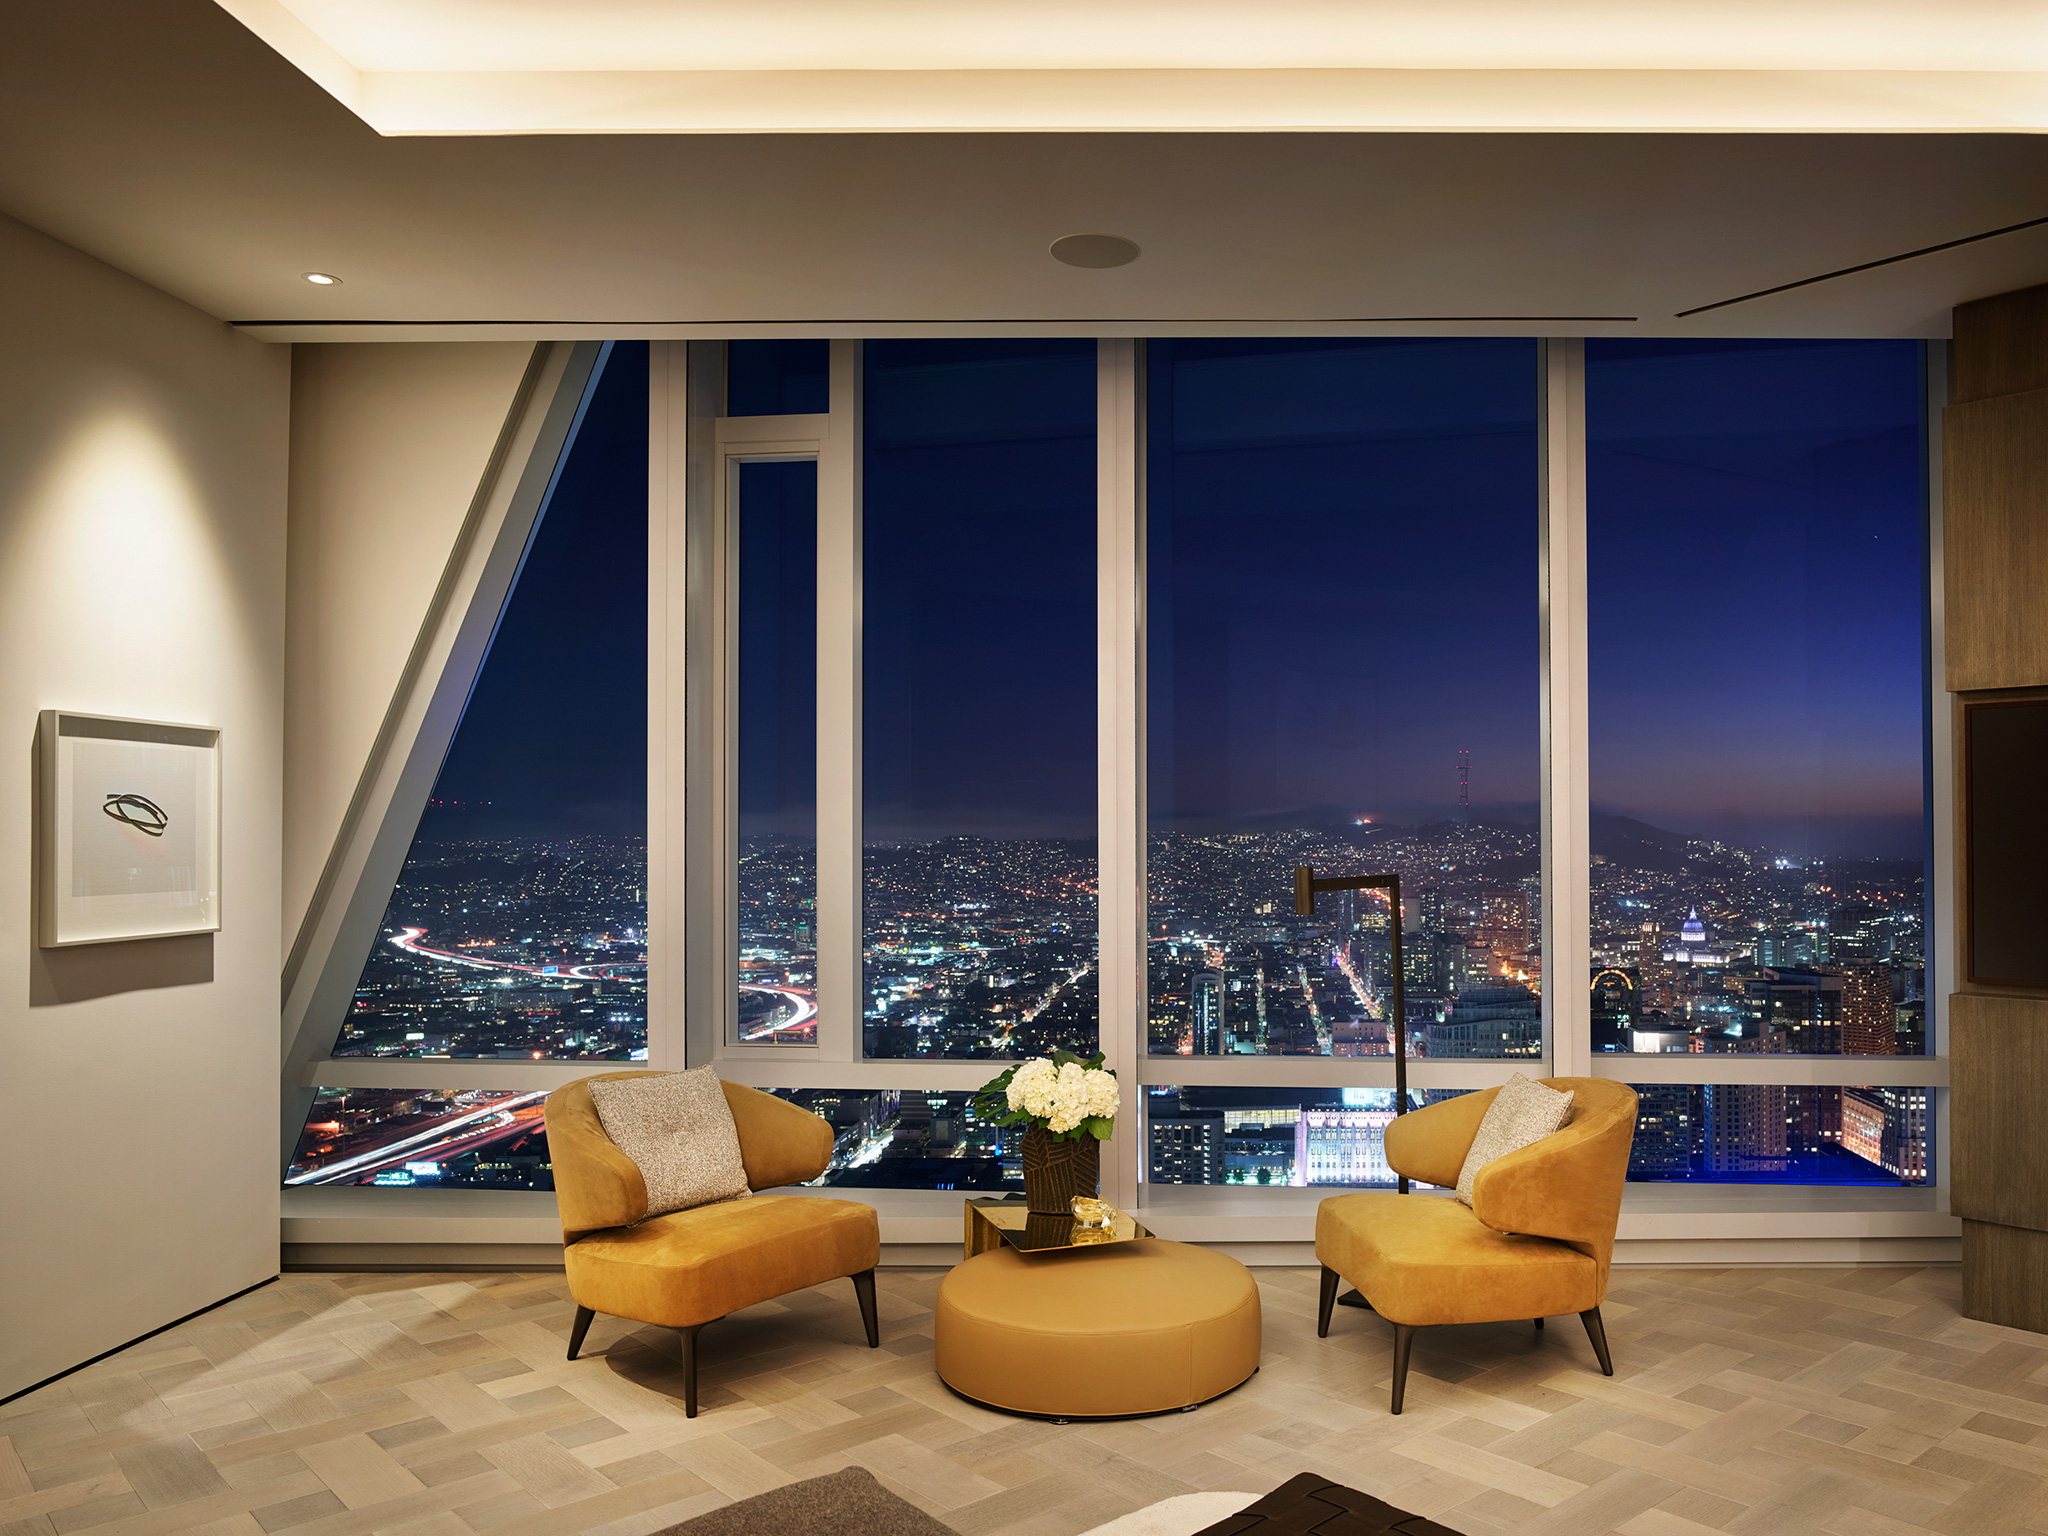 Grand Penthouse Primary Bedroom Sitting Area at Night with City Lights in View